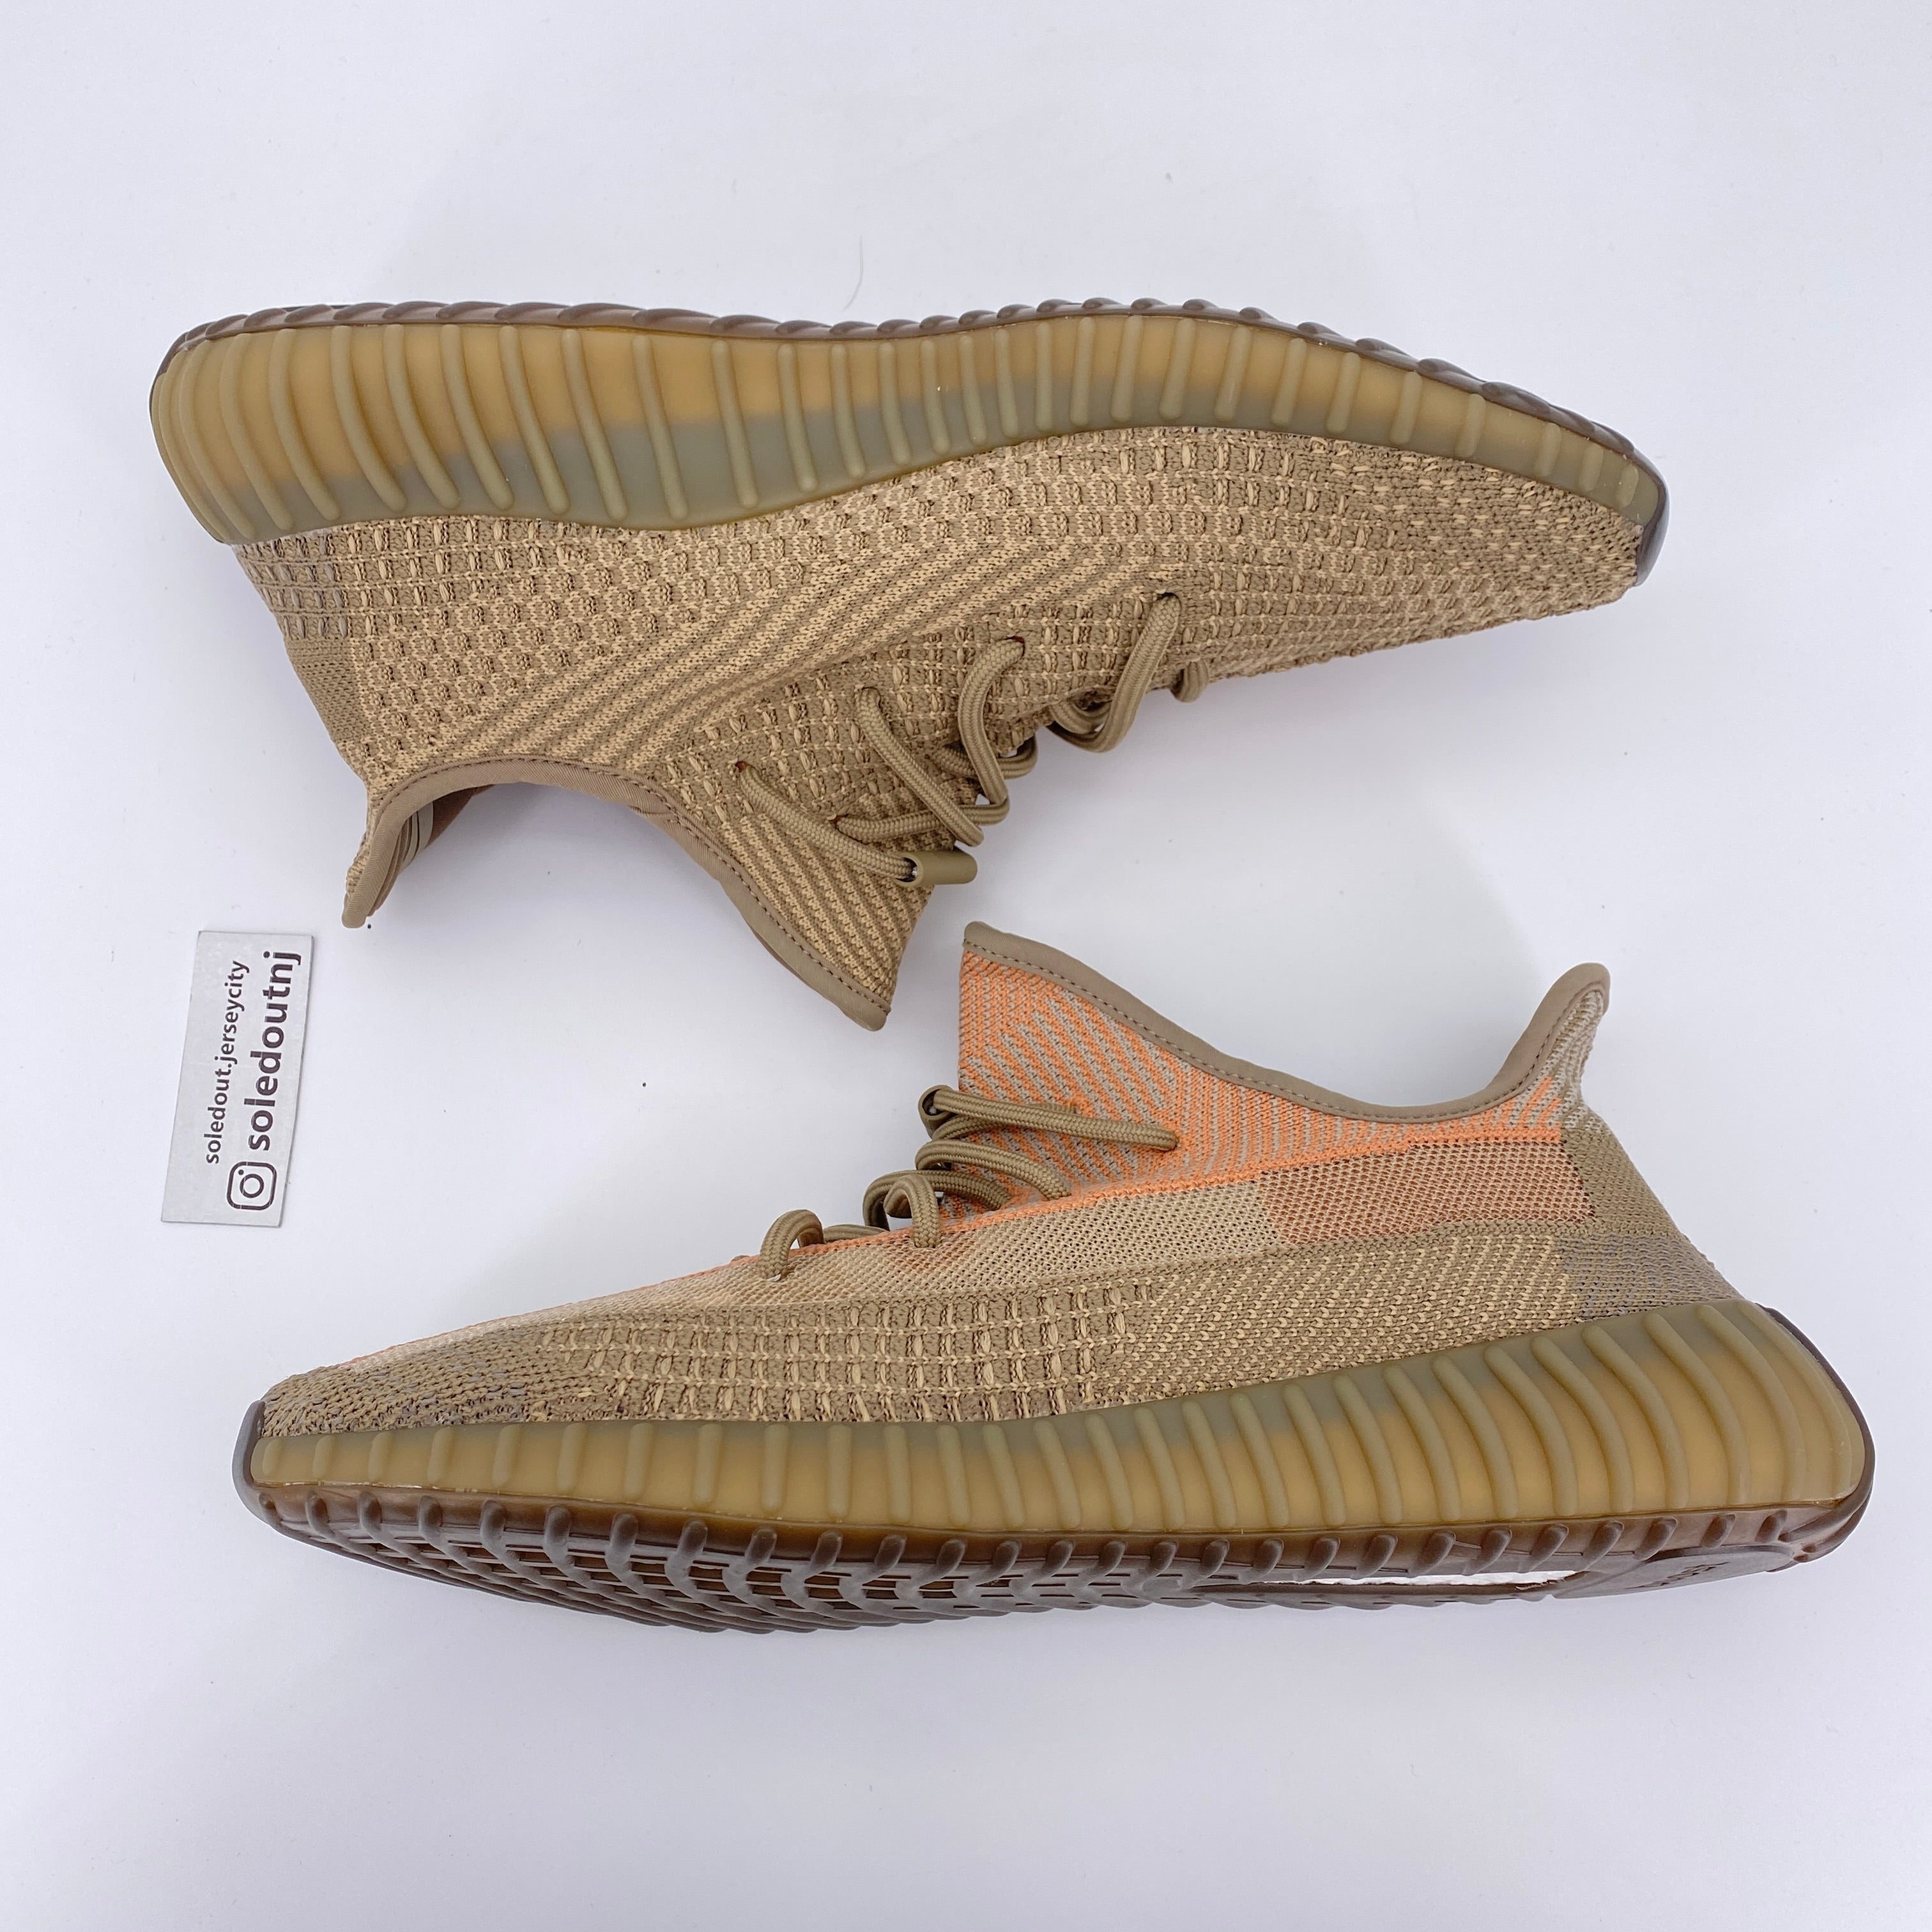 Yeezy 350 v2 "Sand Taupe" 2020 New Size 13